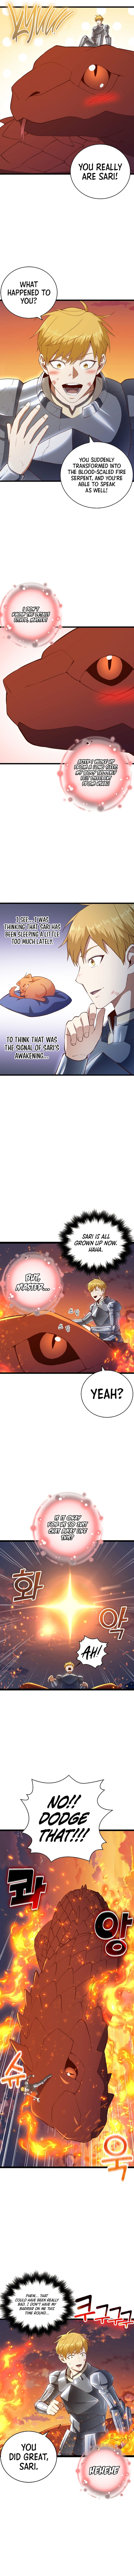 The Lord's Coins Aren't Decreasing?! - Chapter 88 Page 4